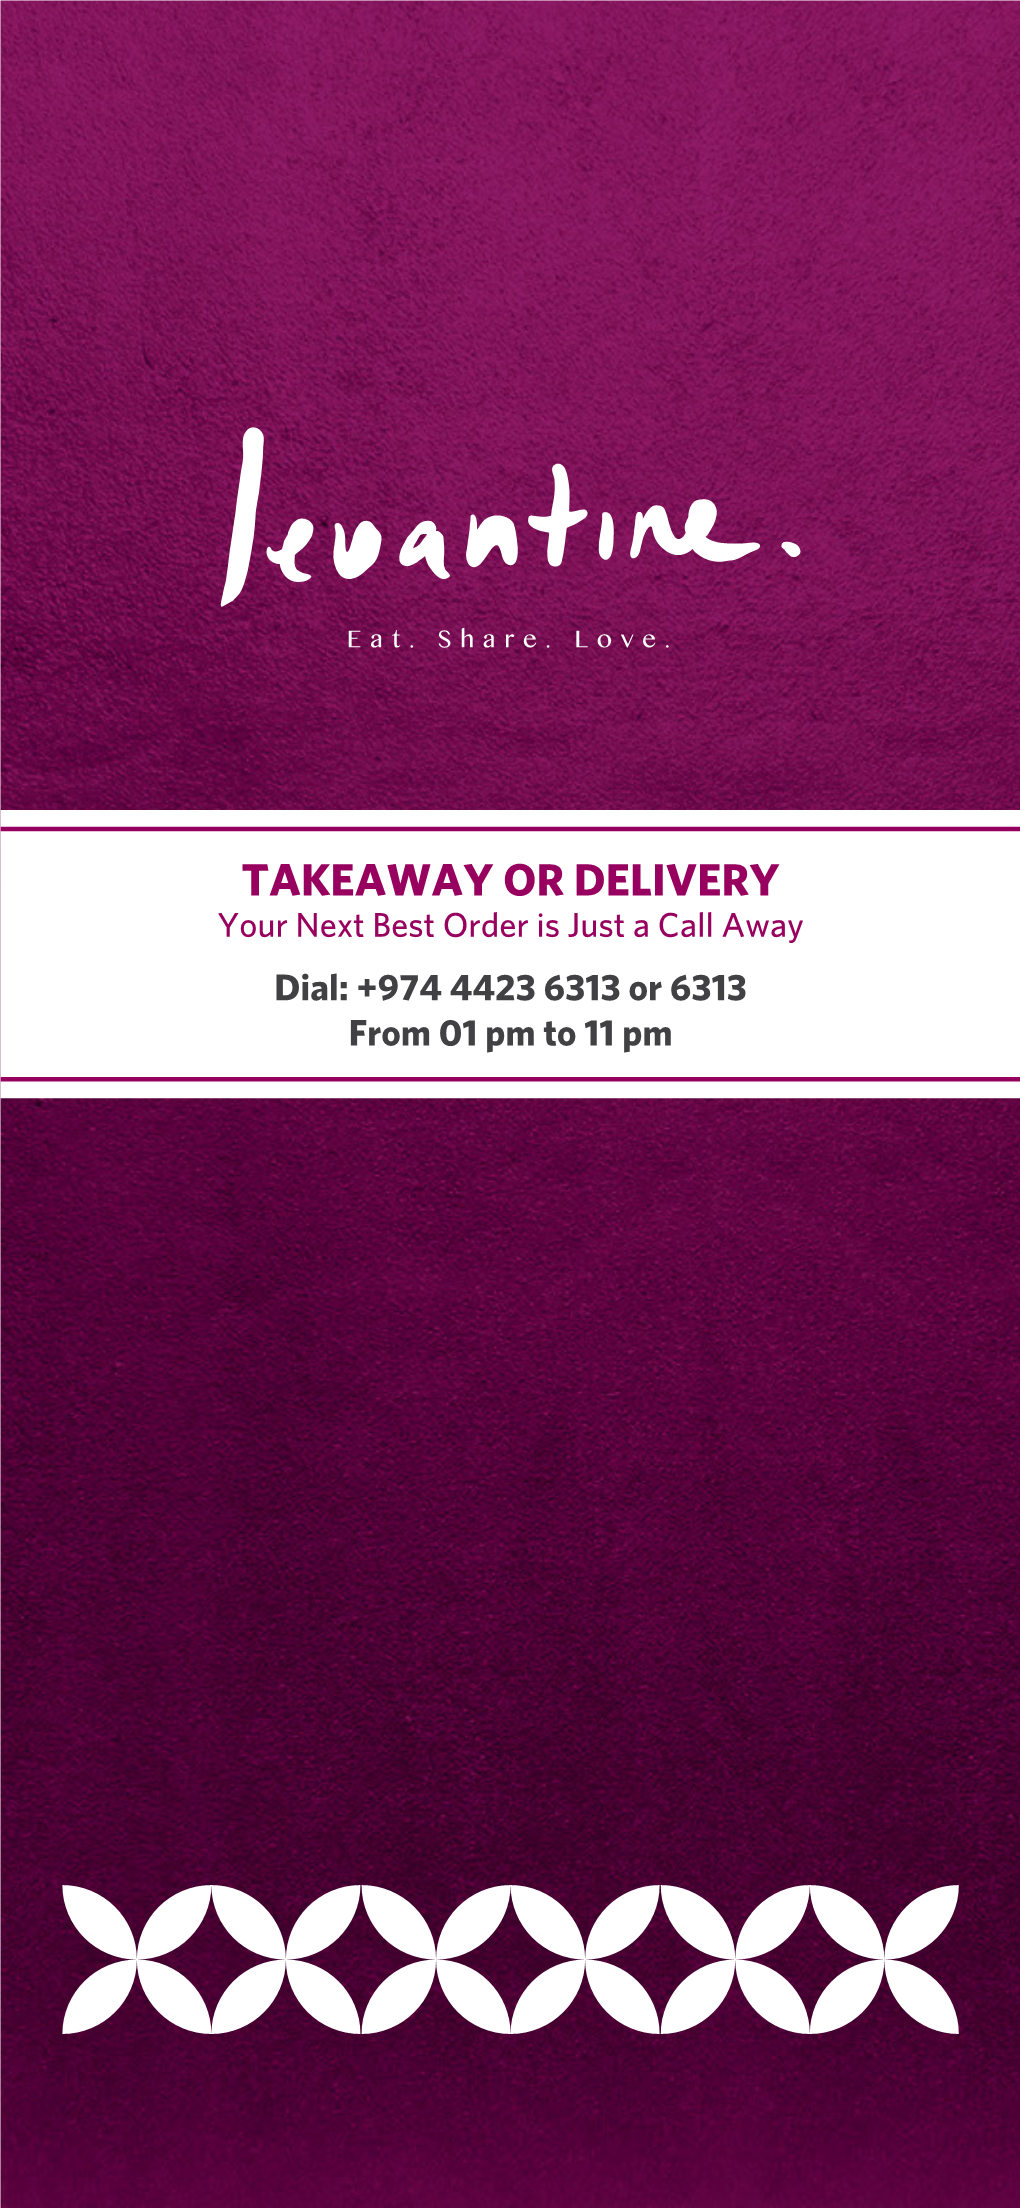 TAKEAWAY OR DELIVERY Your Next Best Order Is Just a Call Away Dial: +974 4423 6313 Or 6313 from 01 Pm to 11 Pm MEZZERIA